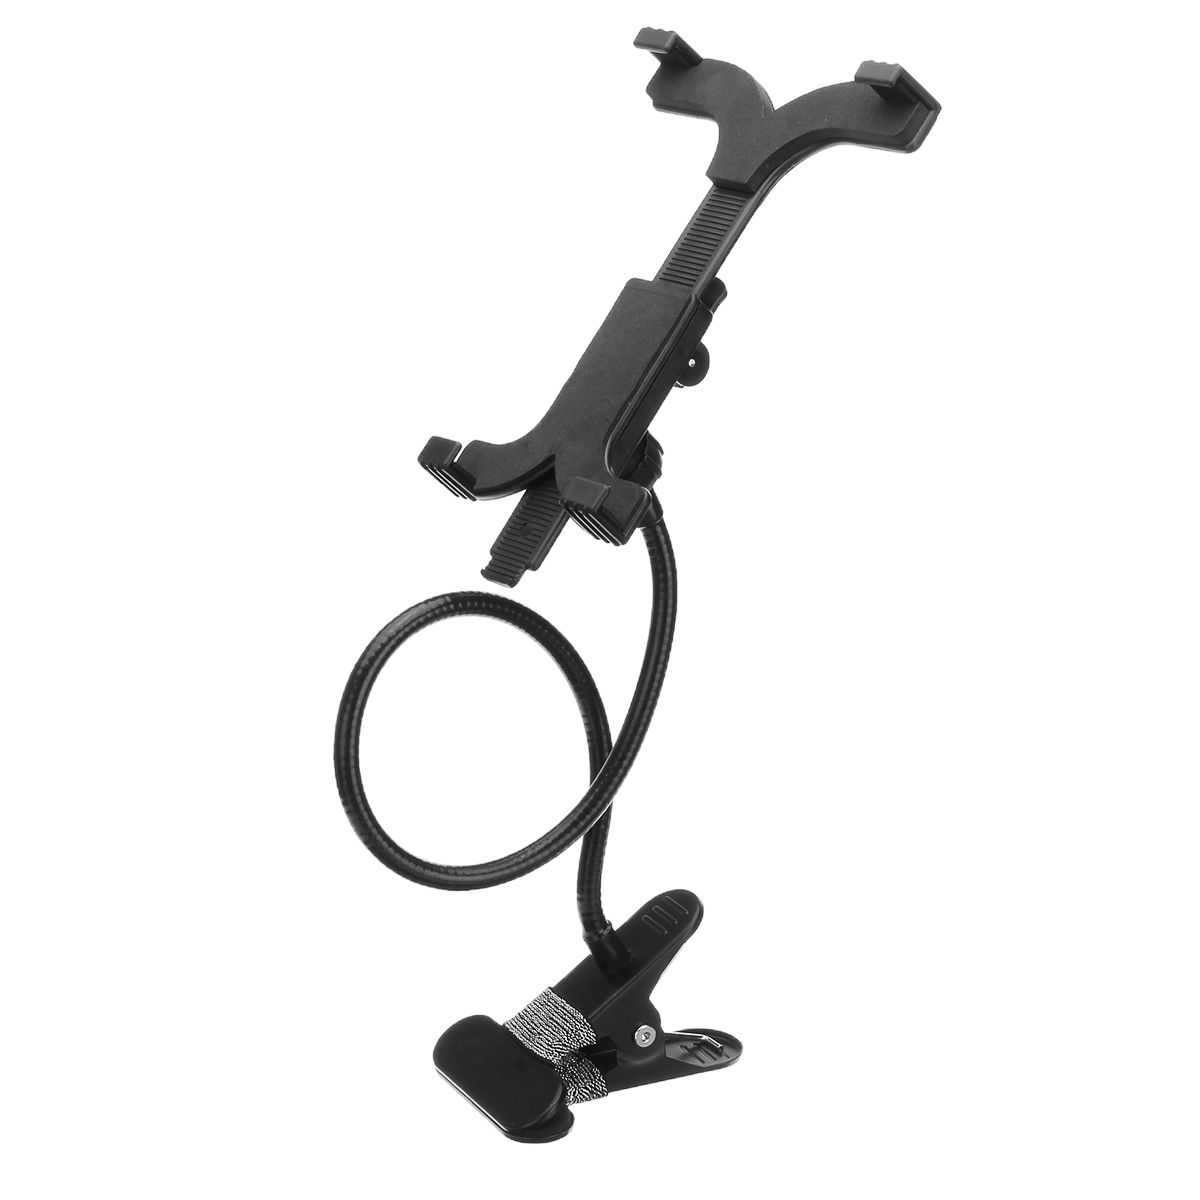 Universal-360deg-Rotating-Lazy-Bed-Desk-Mount-Stand-Holder-For-iPad-Tablet-1552544